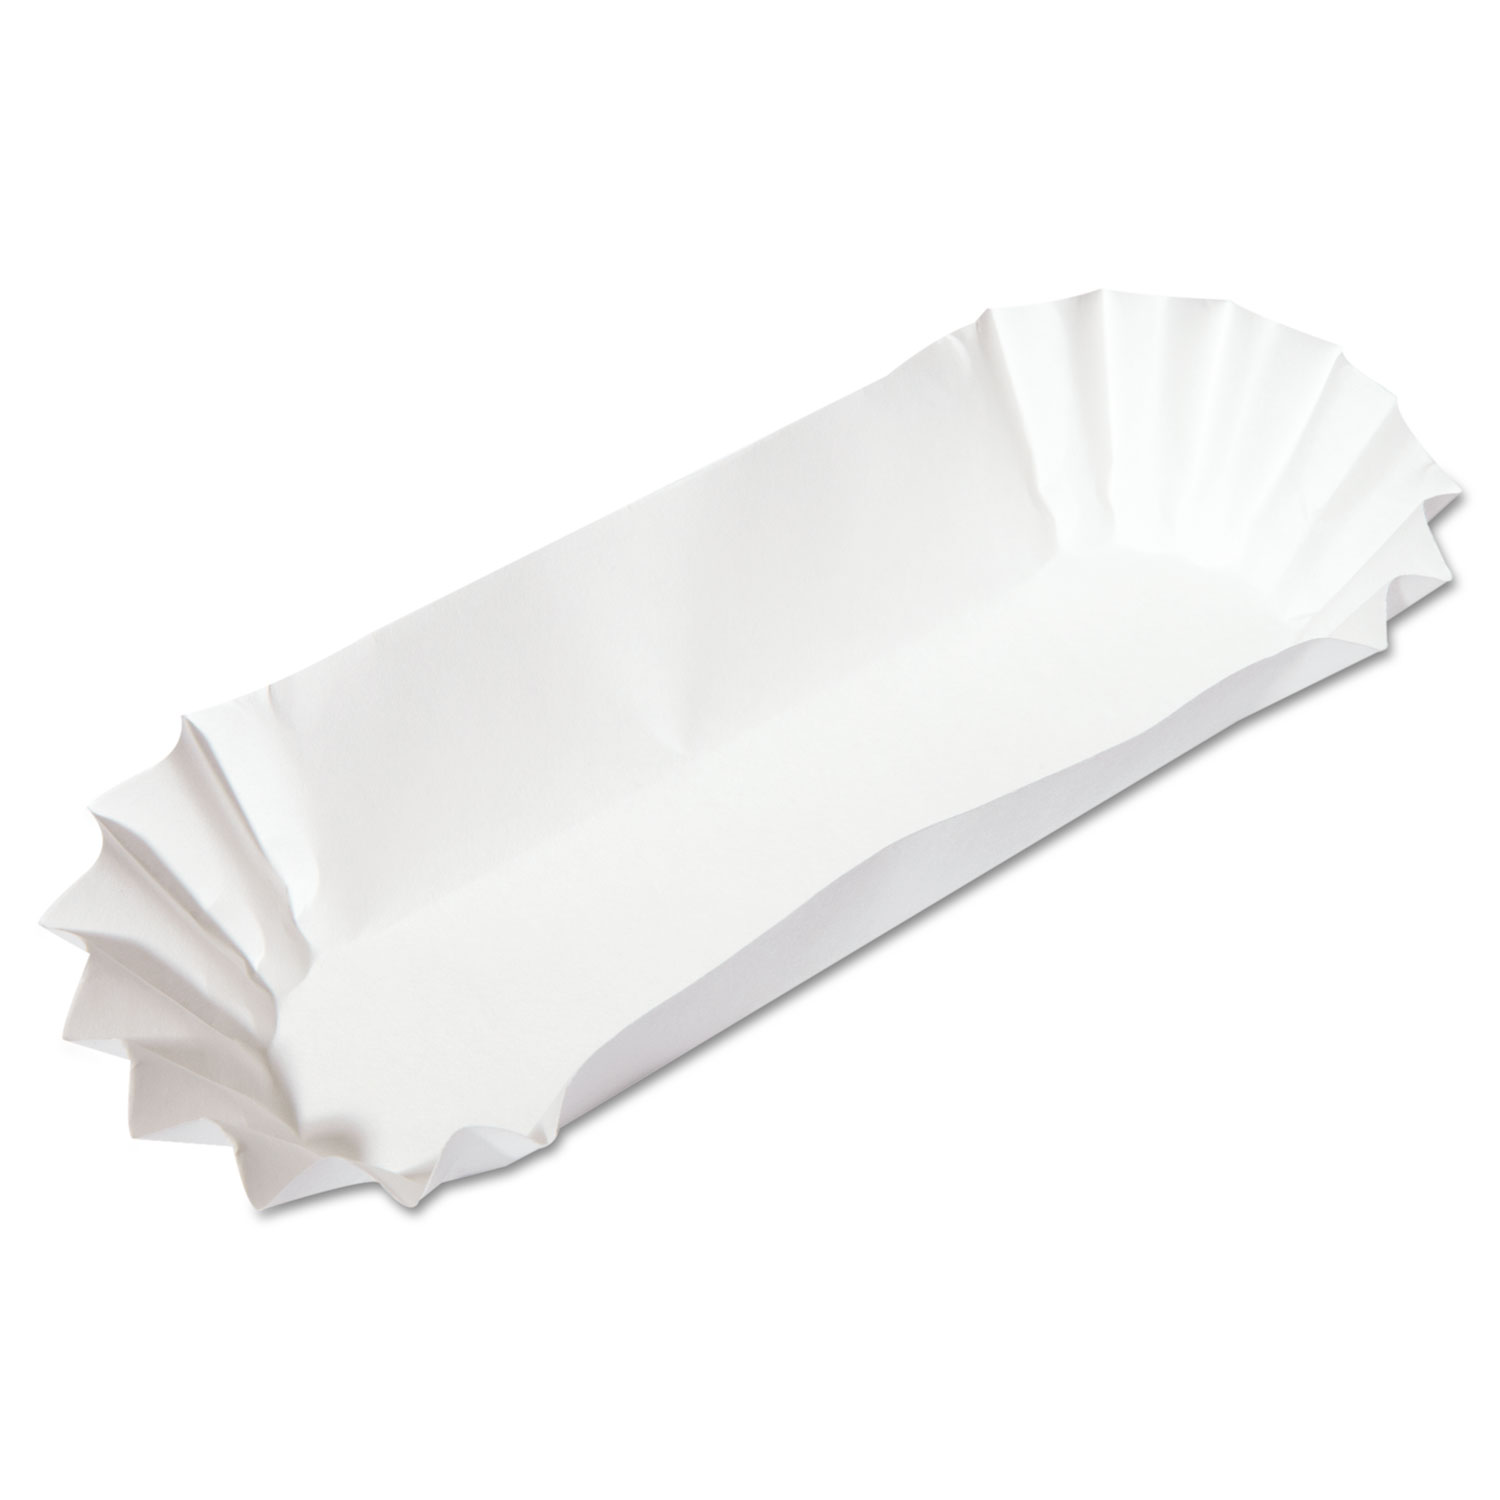 Fluted Hot Dog Trays, 6w x 2d x 2h, White, 500/Sleeve, 6 Sleeves/Carton